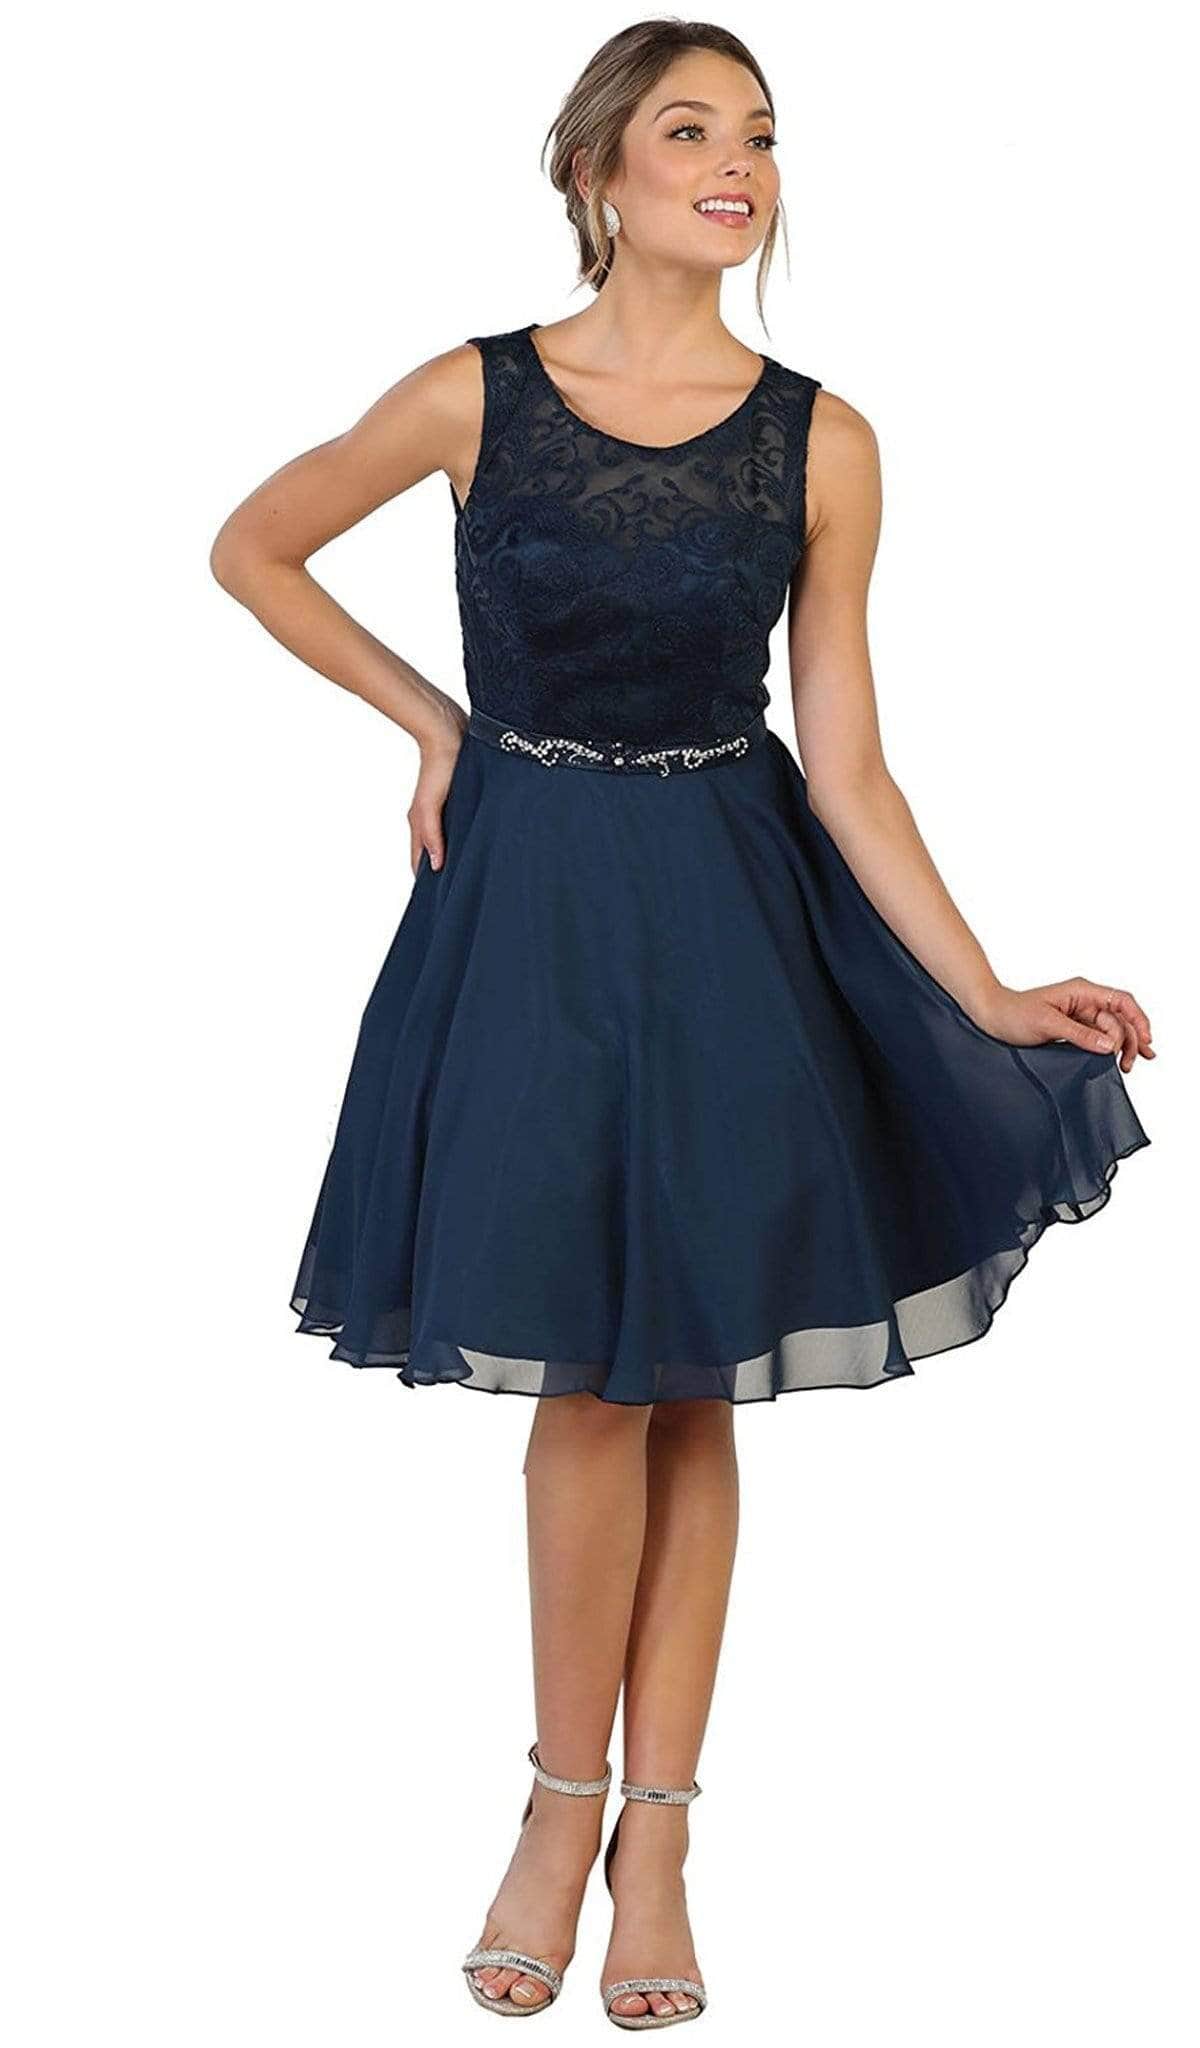 May Queen, May Queen MQ1521 - Jewel Neck Pleated Cocktail Dress